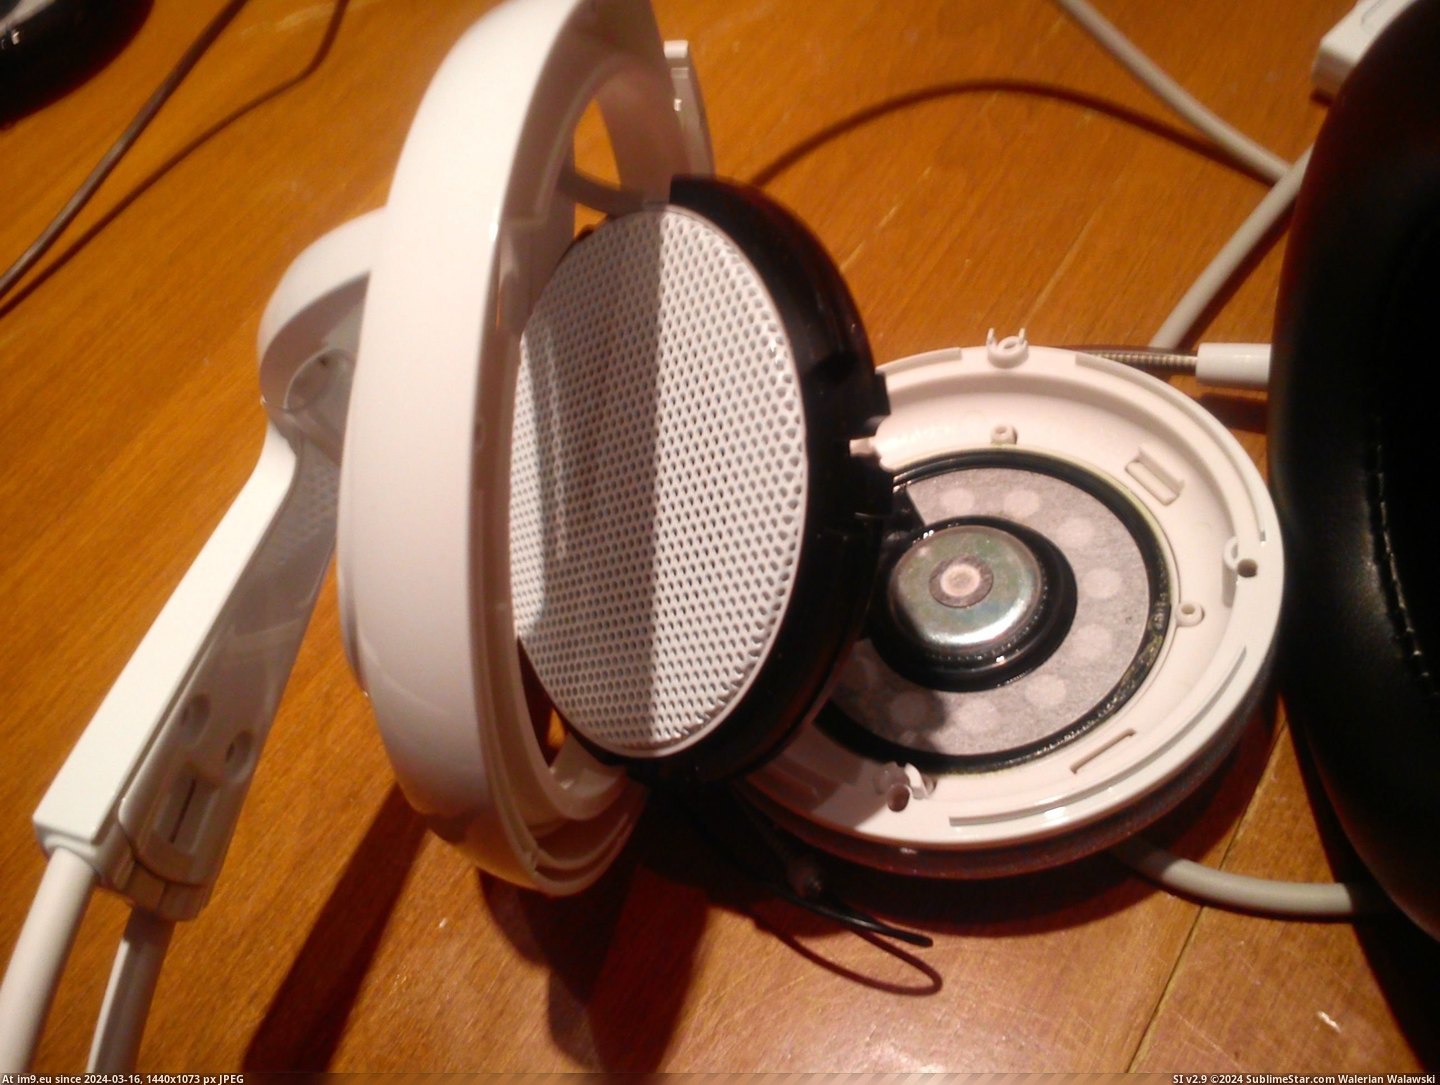 #Gaming #Headset #Modified [Gaming] I modified my headset. 3 Pic. (Изображение из альбом My r/GAMING favs))